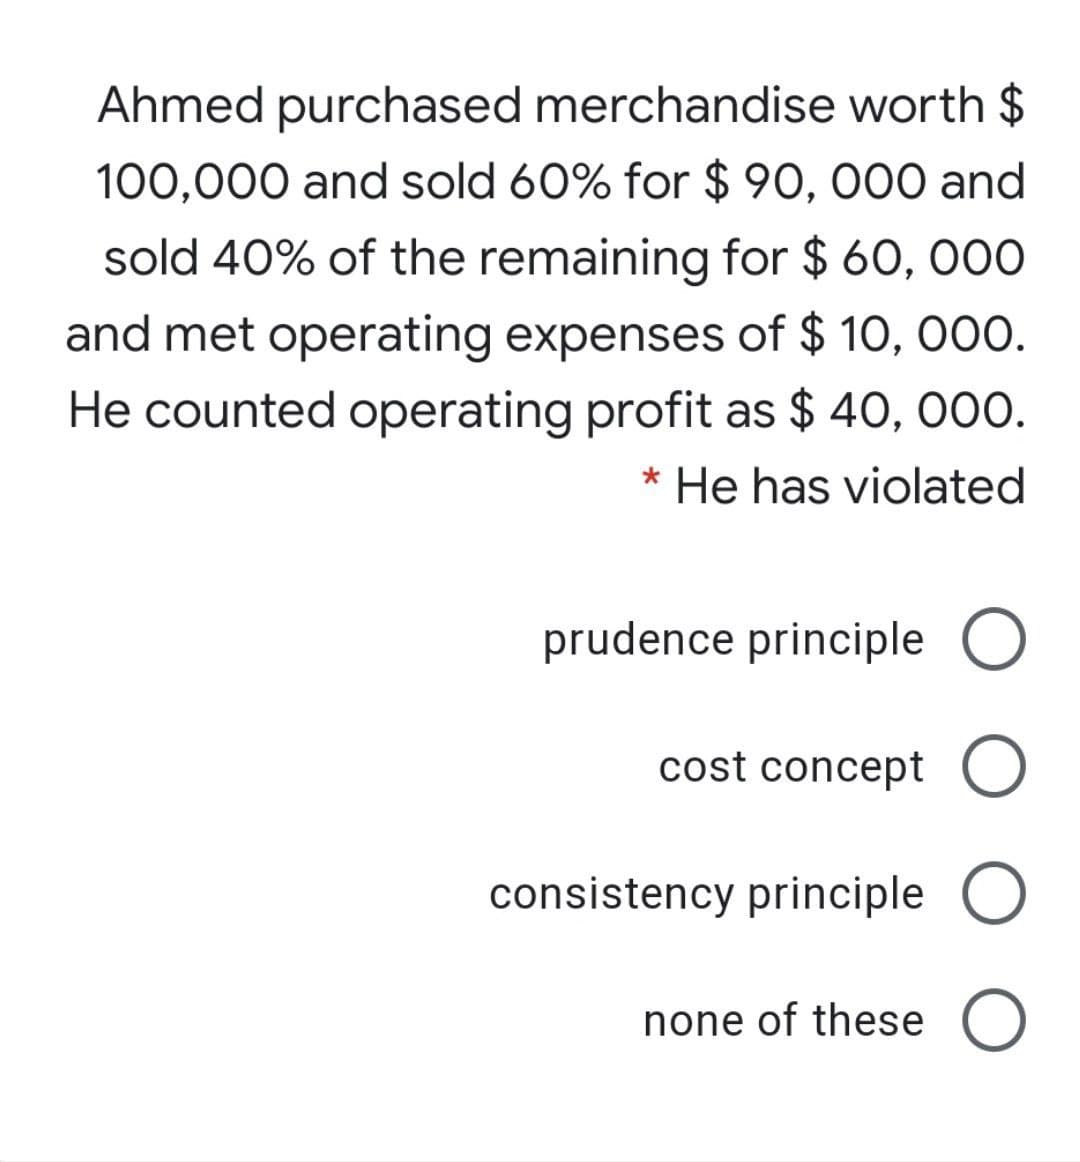 Ahmed purchased merchandise worth $
100,000 and sold 60% for $ 90, 000 and
sold 40% of the remaining for $ 60, 000
and met operating expenses of $ 10, 000.
He counted operating profit as $ 40, 000.
* He has violated
prudence principle O
cost concept O
consistency principle O
none of these
